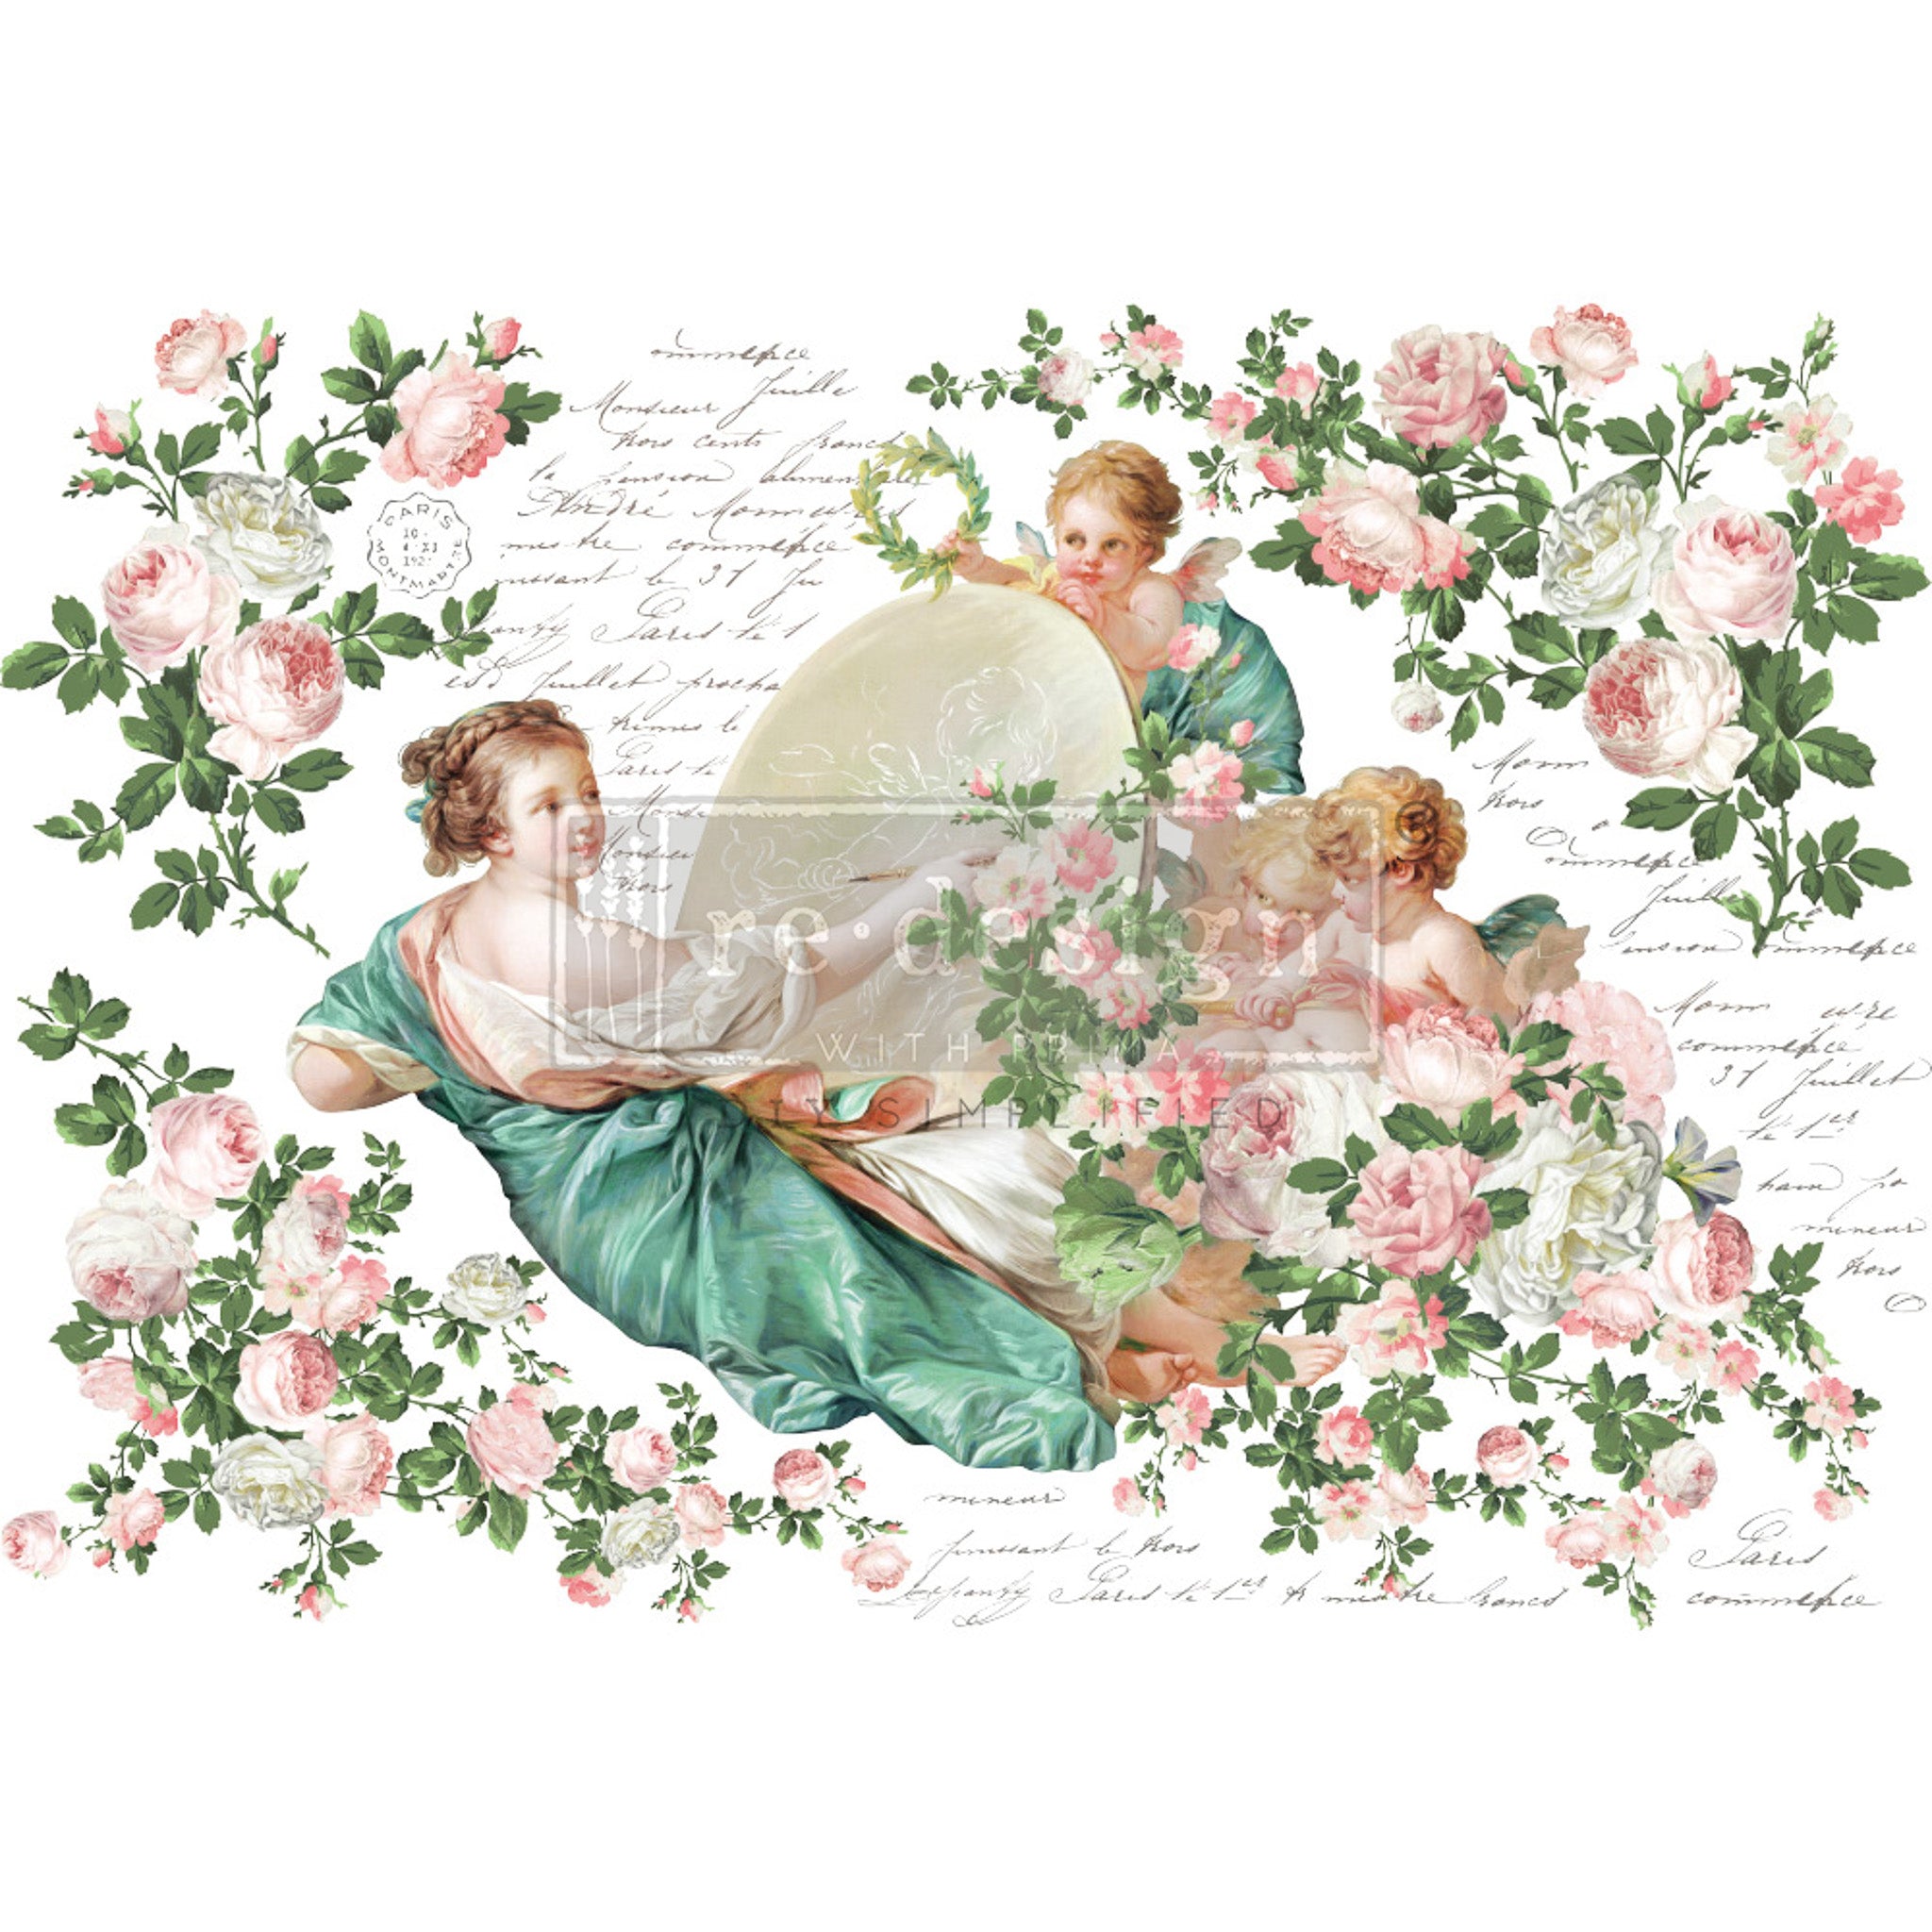 Rub-on transfer design that features cherubic figures, elegant script, and delicate pink roses.